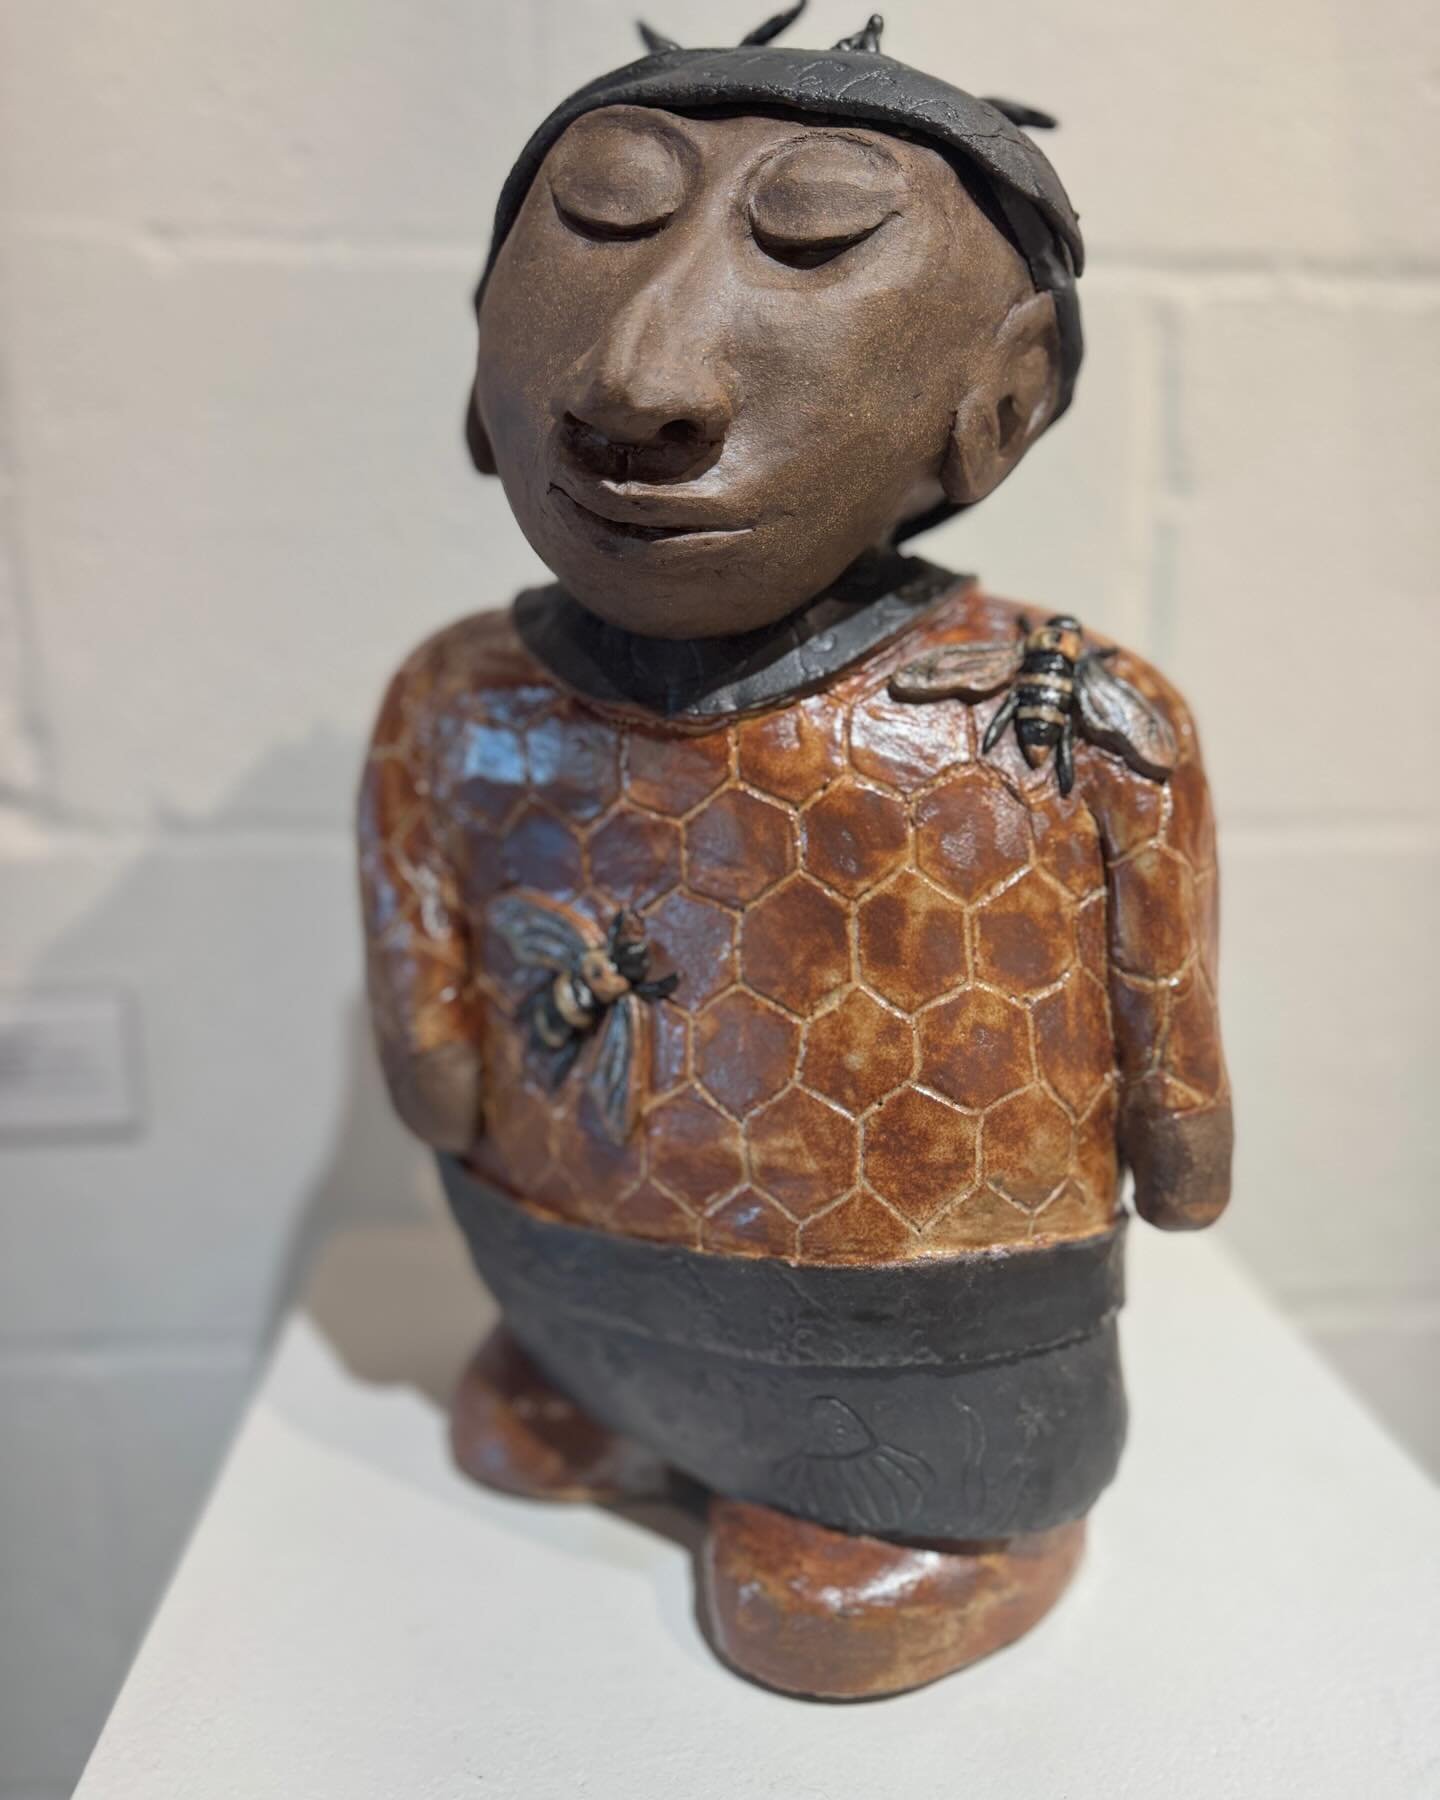 It&rsquo;s a bee-u-tiful day to stop by and visit our Women in Art, A Journey Exhibit!  Spotlight on Jacqueline Jackson&rsquo;s amazing work, &ldquo;Beekeeper&rdquo;, ceramic, 12x9in. 
Inspiration- While building our home a bees built a beehive in a 